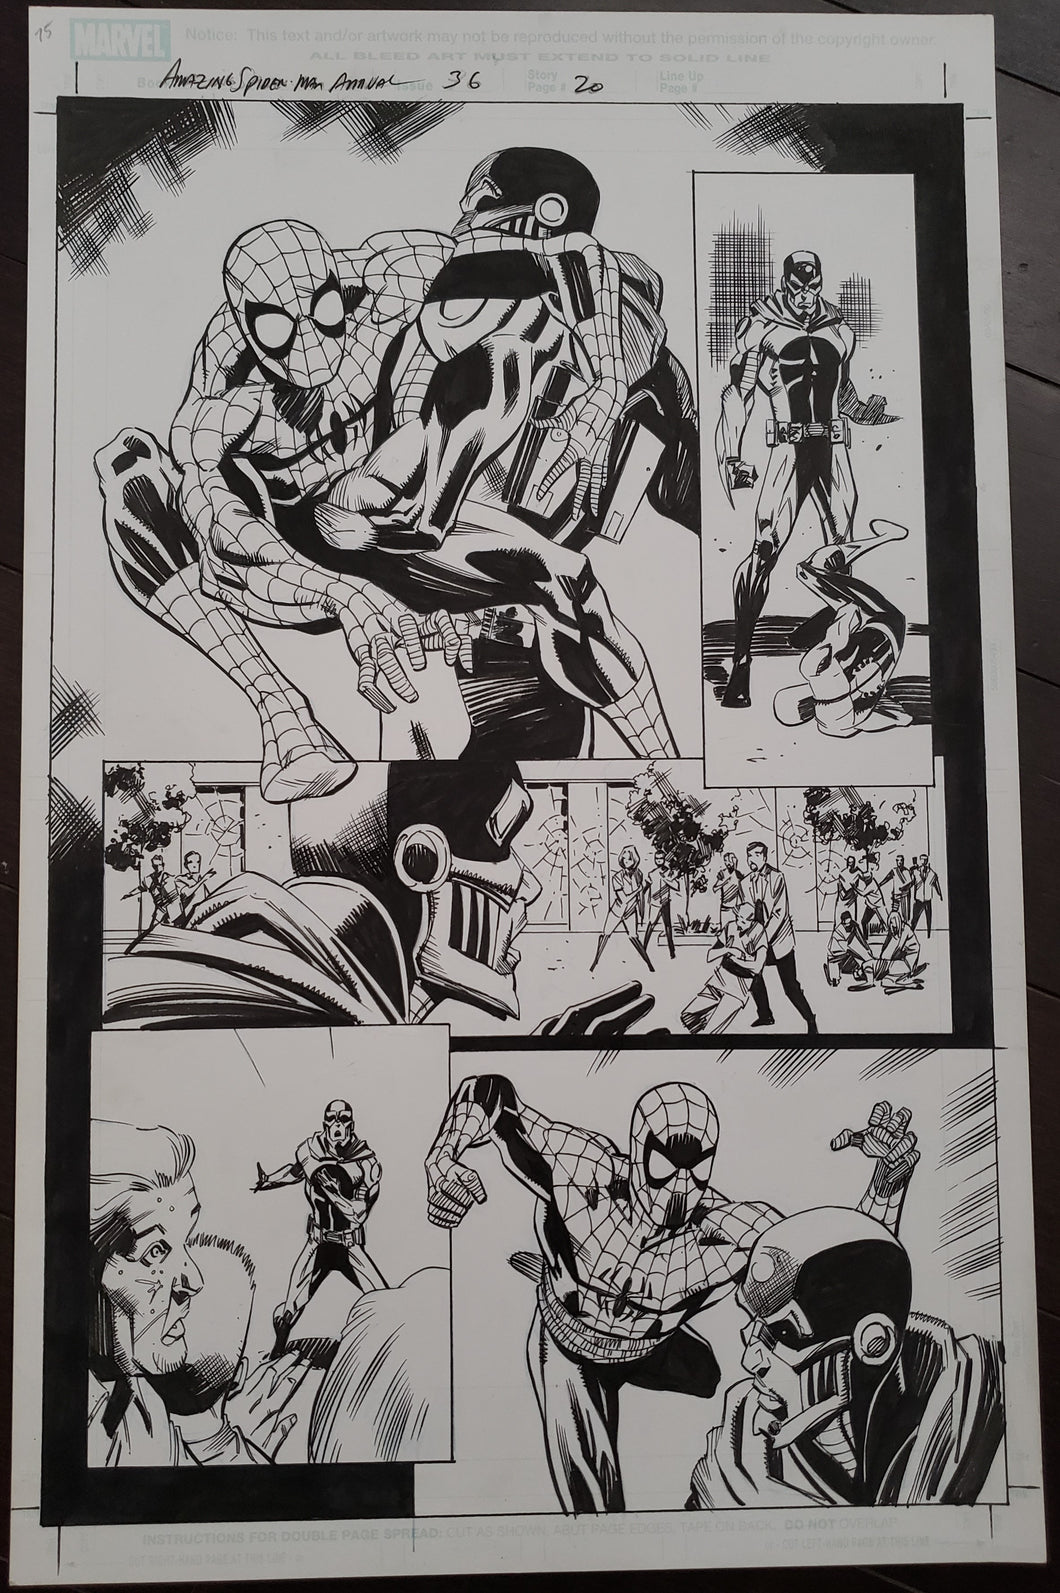 Amazing Spider-Man Annual 36 - Page 20 - Pat Oliffe / Andy Lanning - FIRST APPEARANCE!!